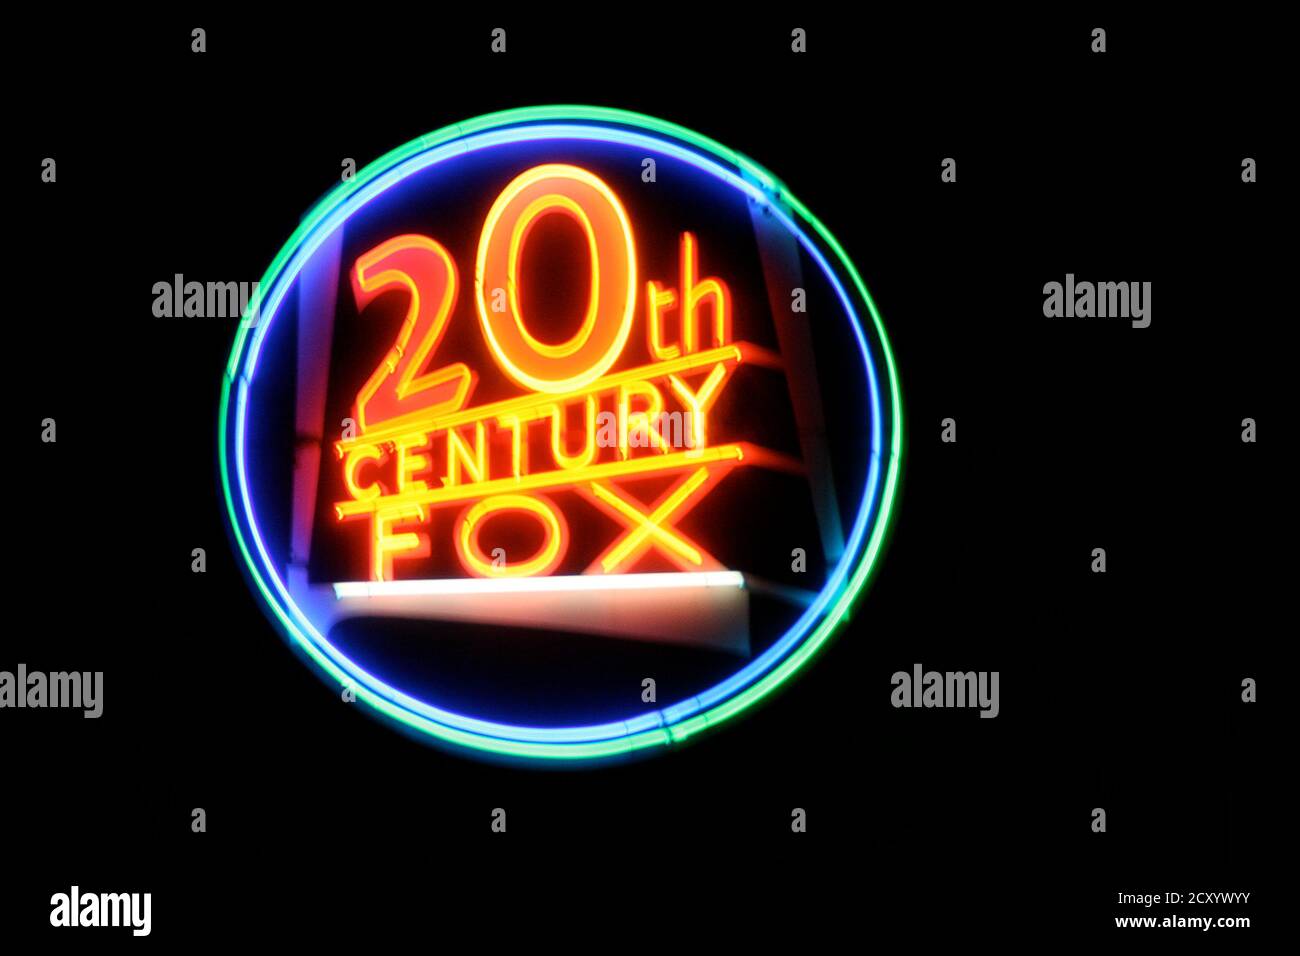 Close-up on a neon light shaped into the 20th Century Fox logo ...